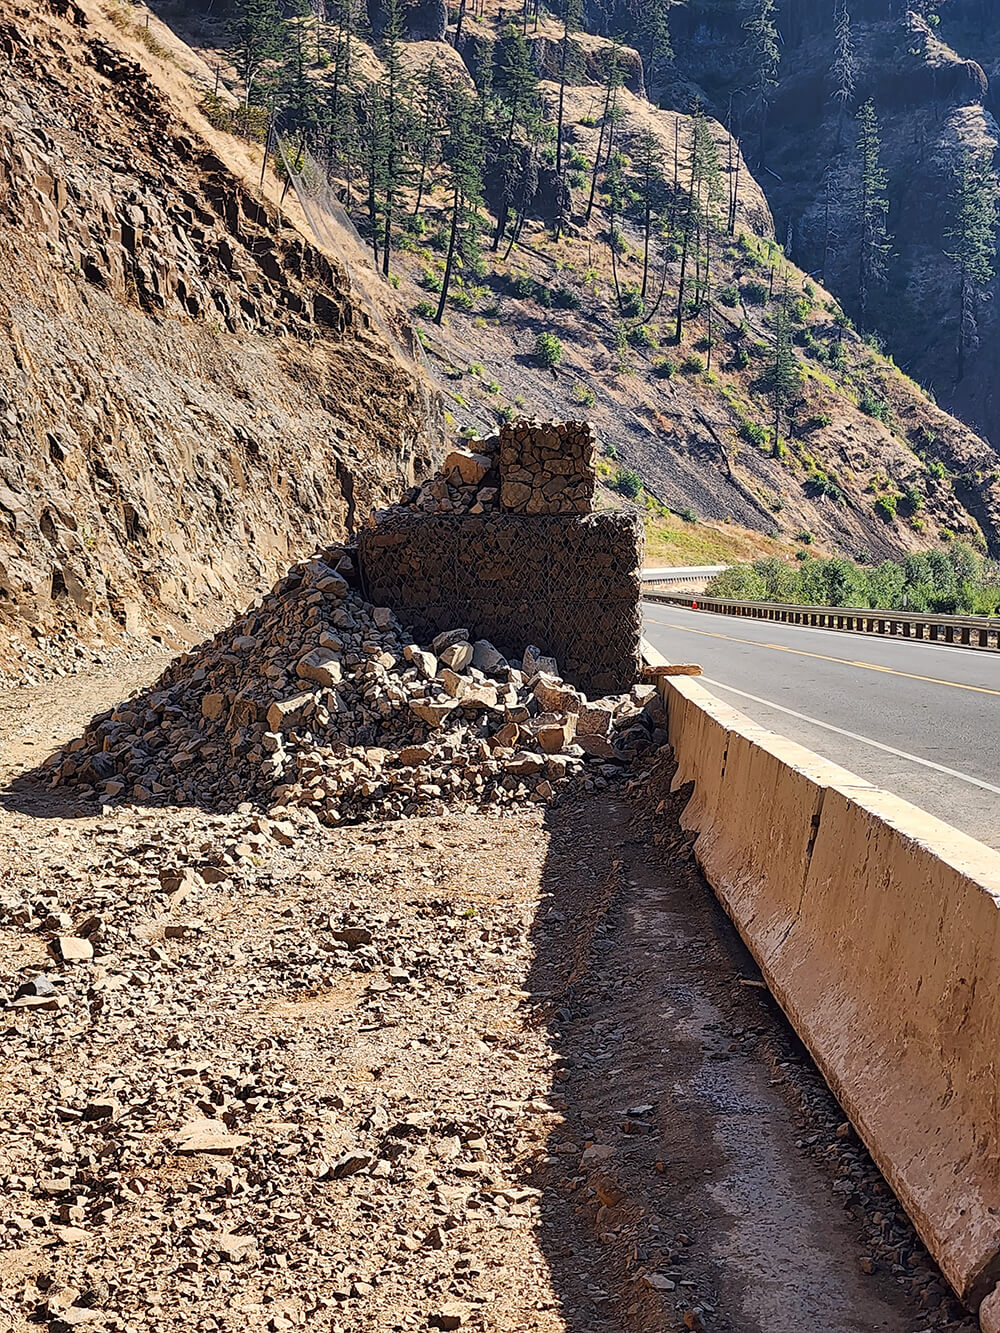 A photo of a mesh and rock protective barrier along a highway